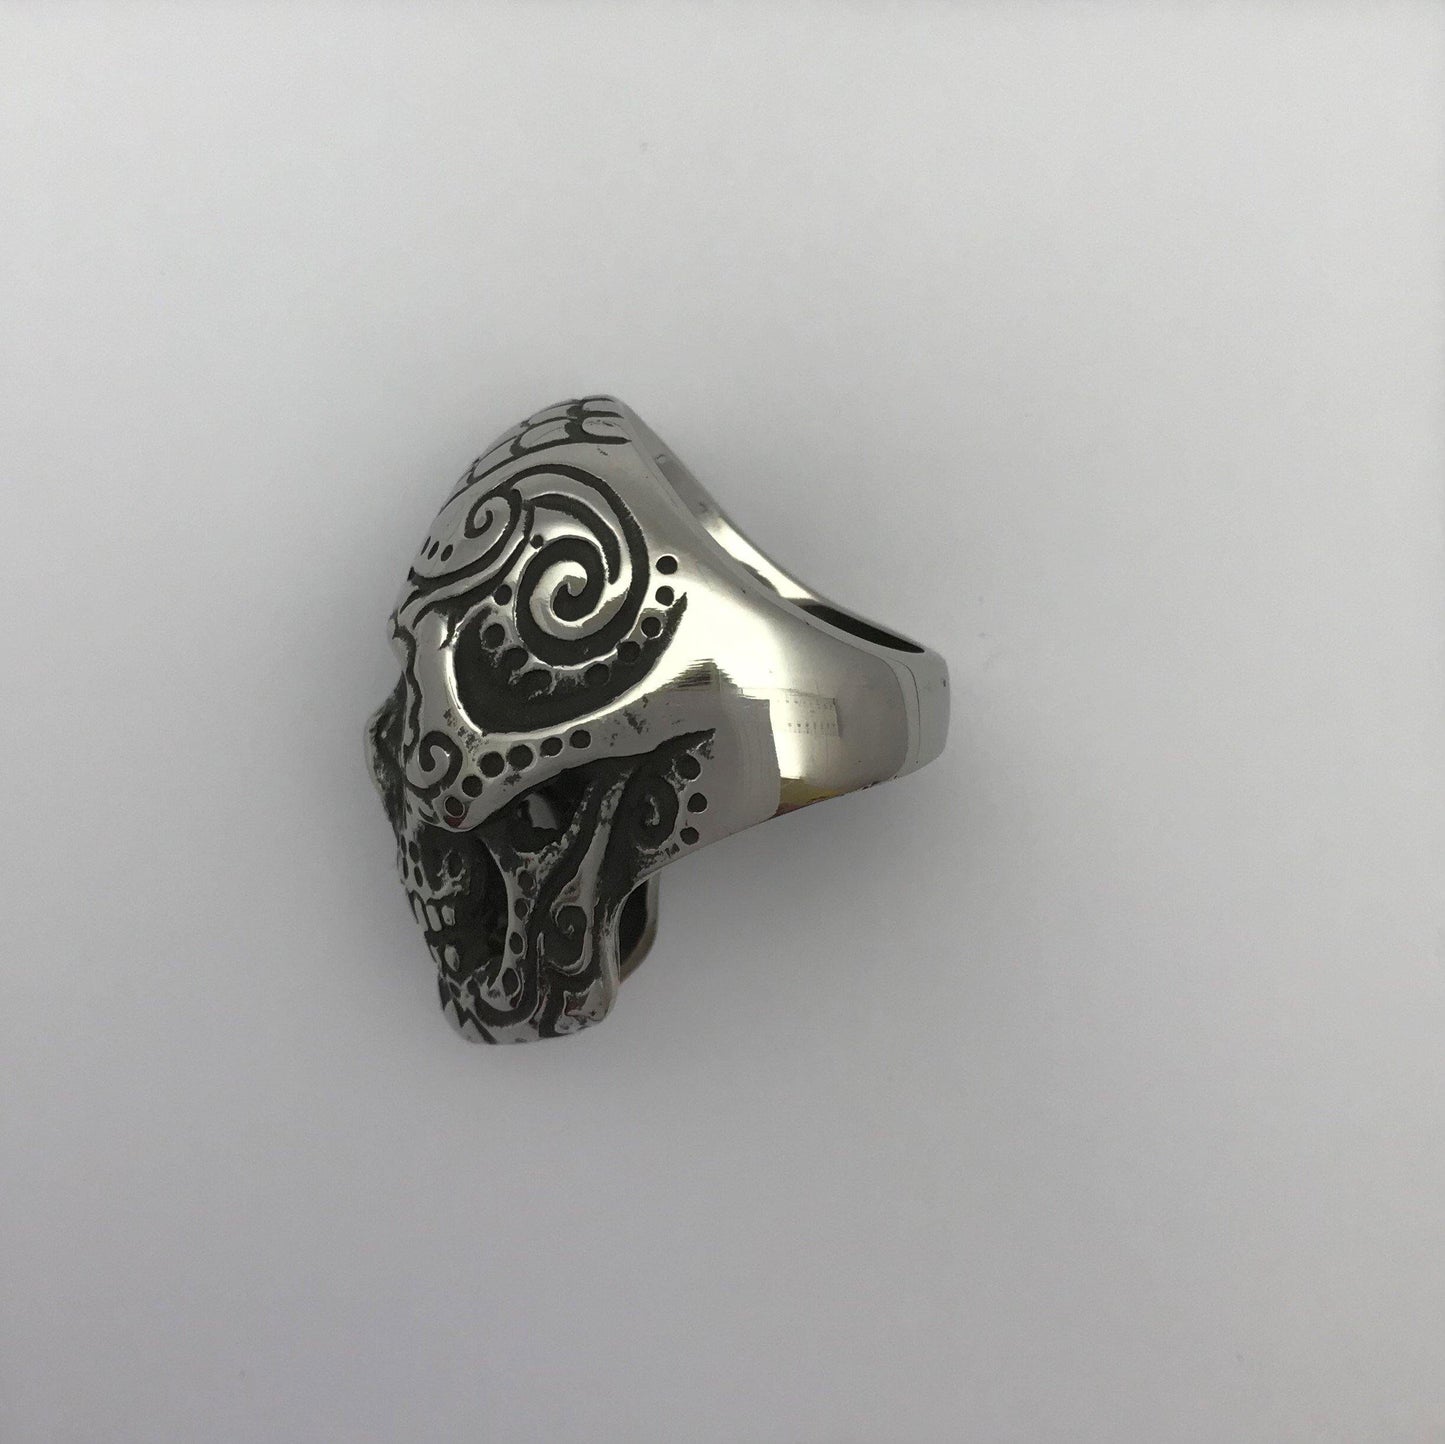 Cinco de Mayo Skull Ring - Big Dog Steel Surgical Stainless Steel